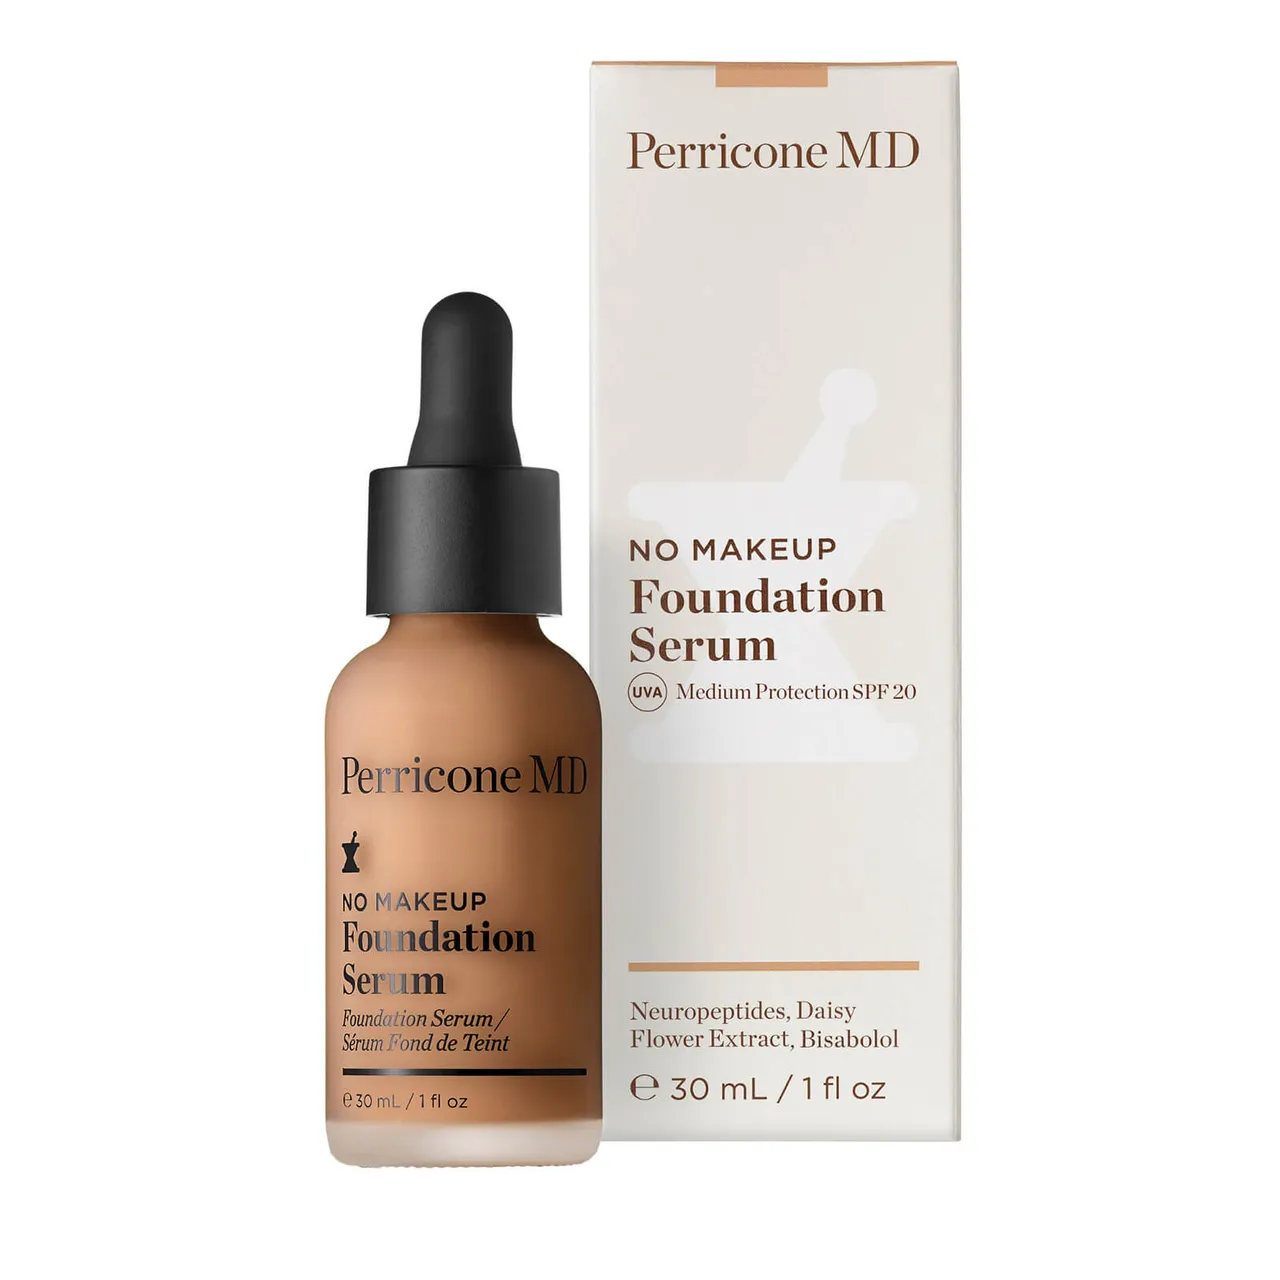 Perricone MD No Makeup Foundation Serum Broad Spectrum SPF20 30ml (Various Shades) - 6 Golden